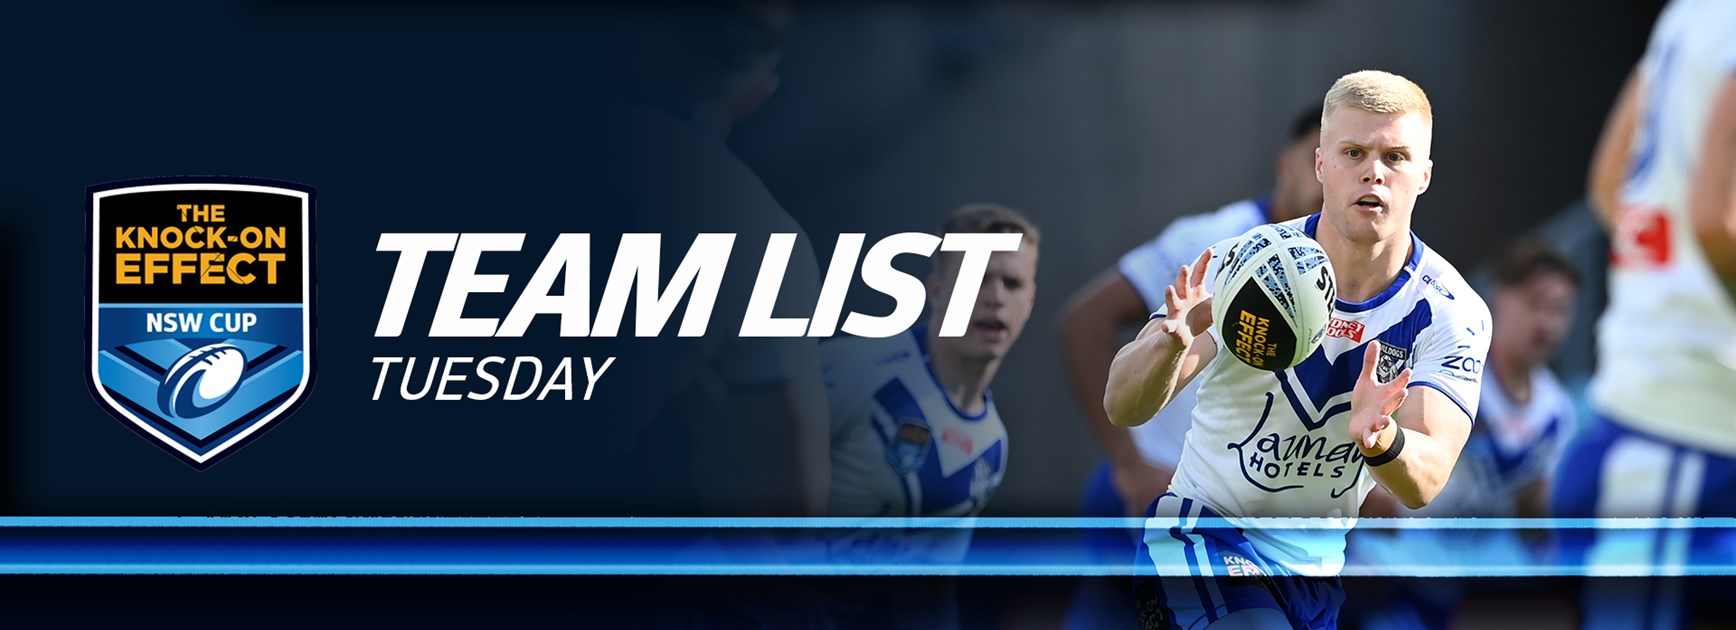 Team List Tuesday | The Knock-On Effect NSW Cup - Round 17